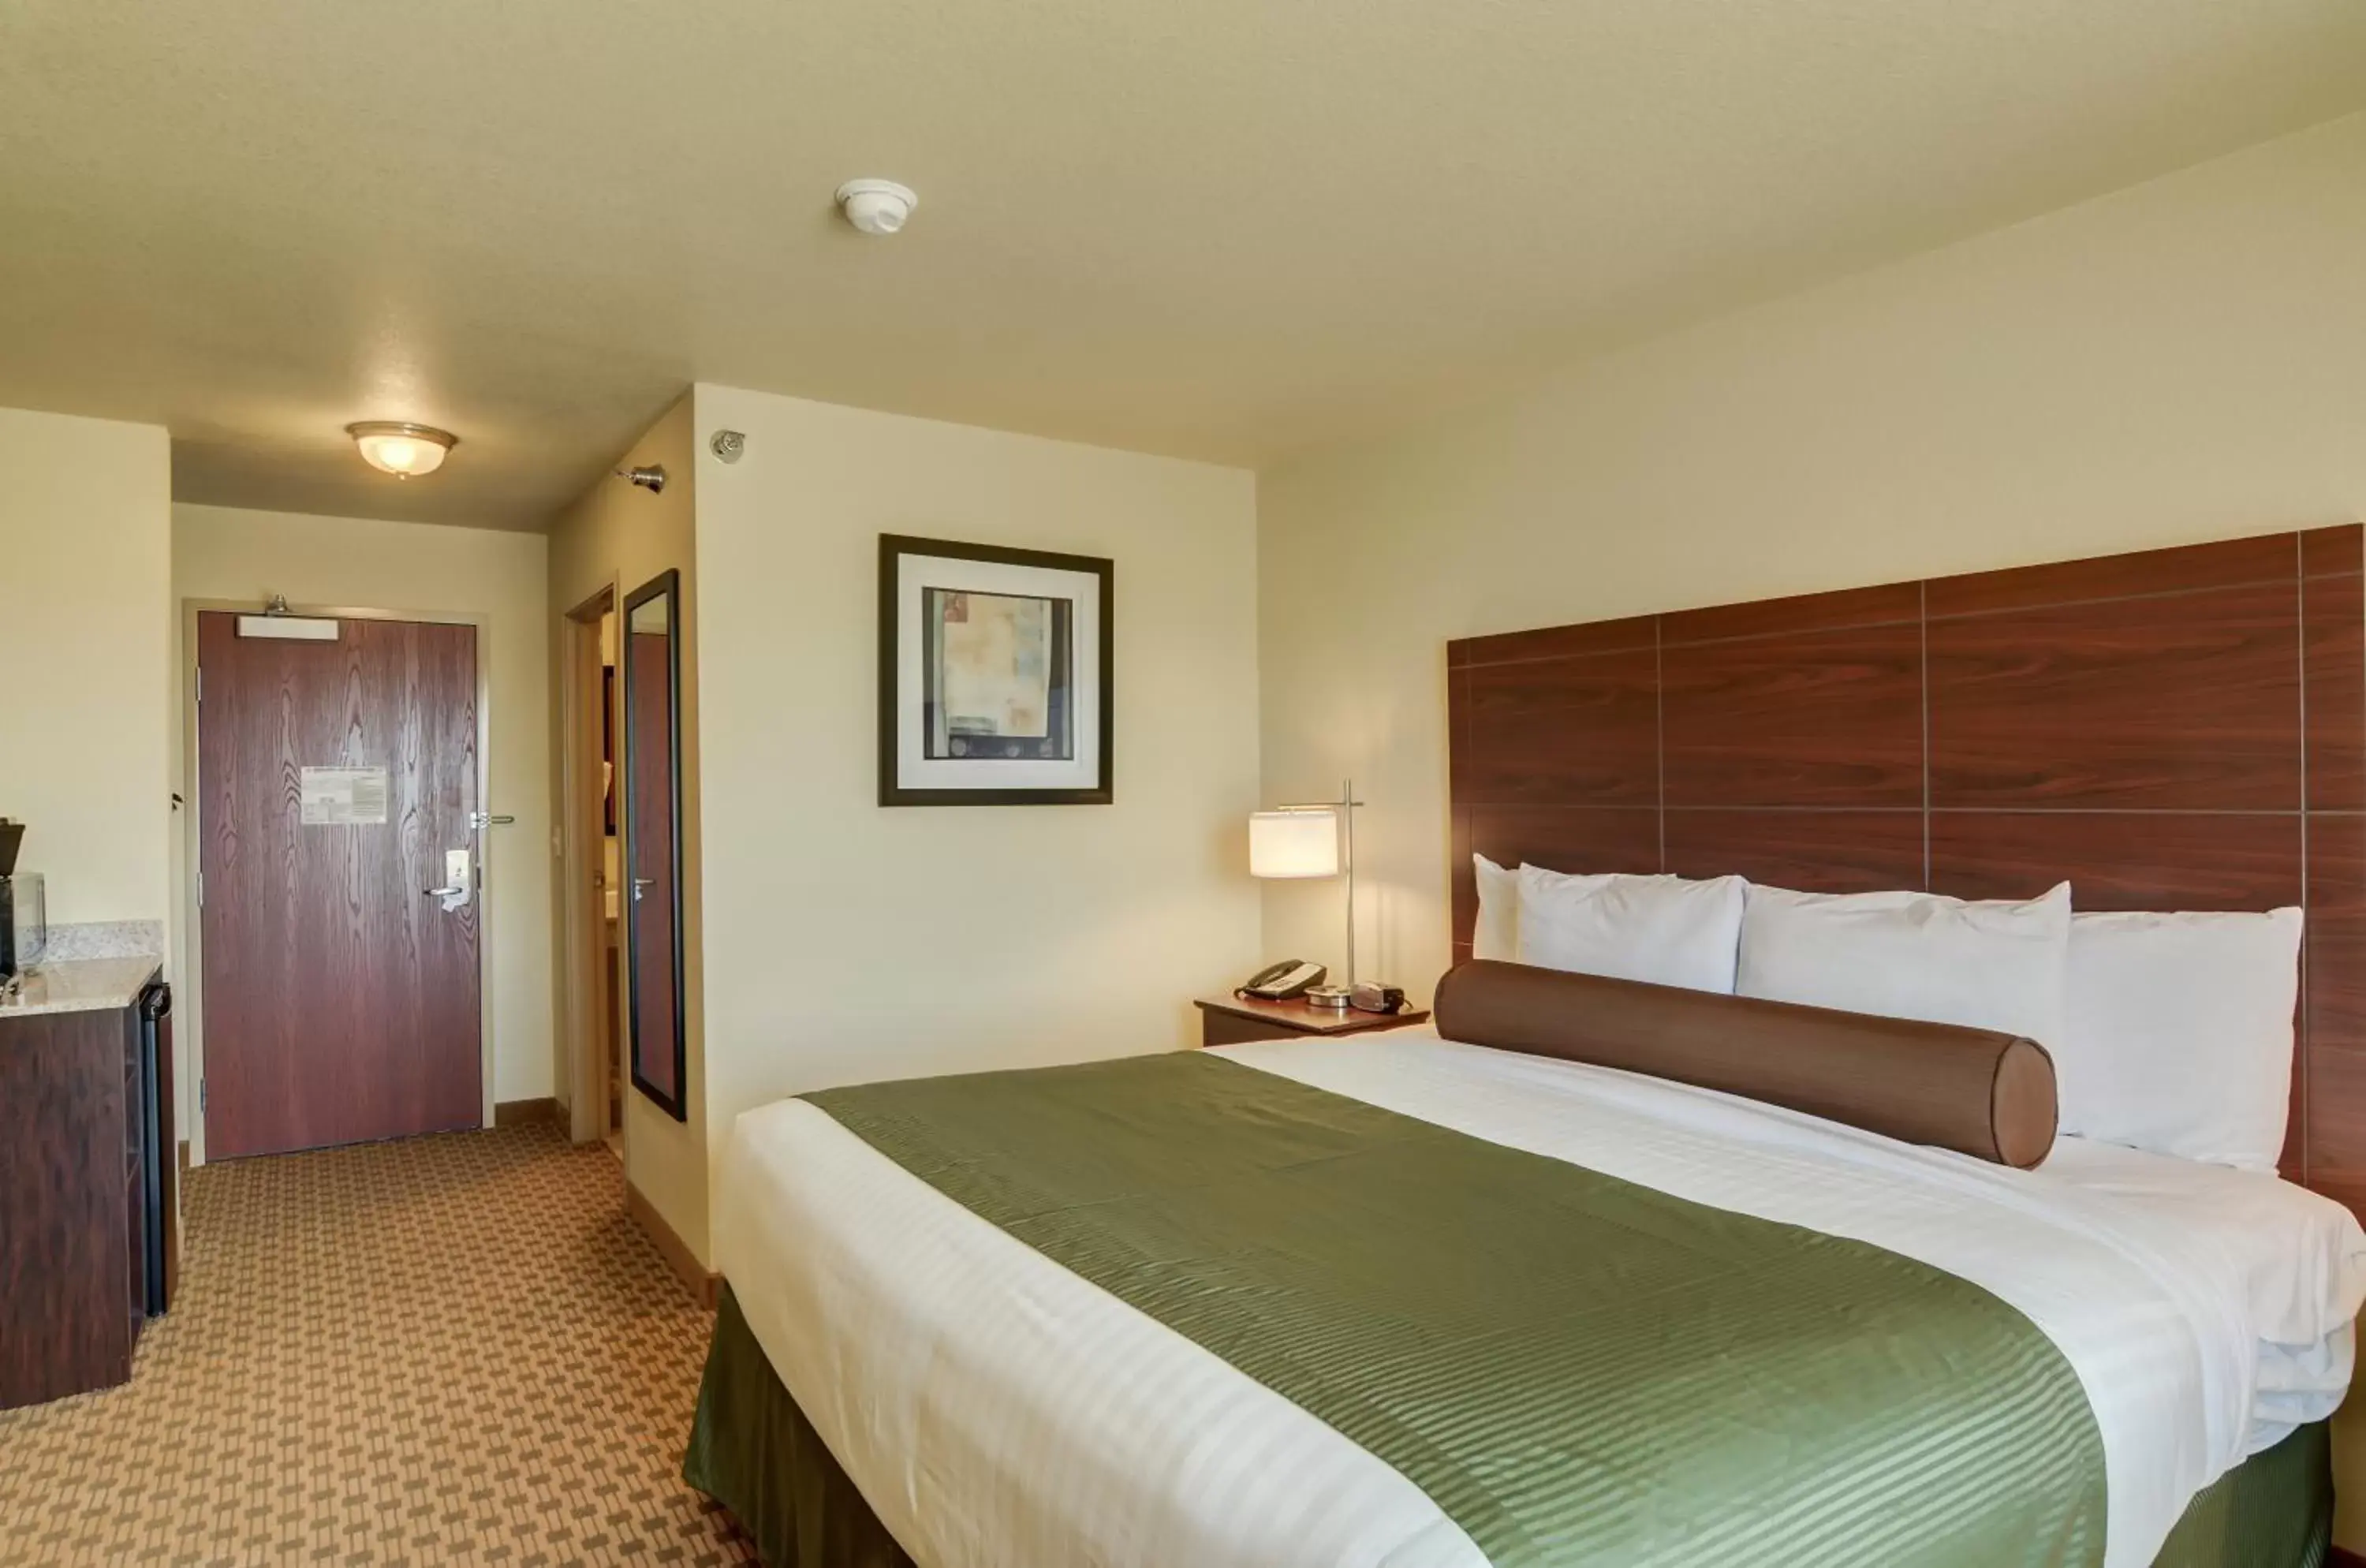 Bed, Room Photo in Cobblestone Inn & Suites - Ord